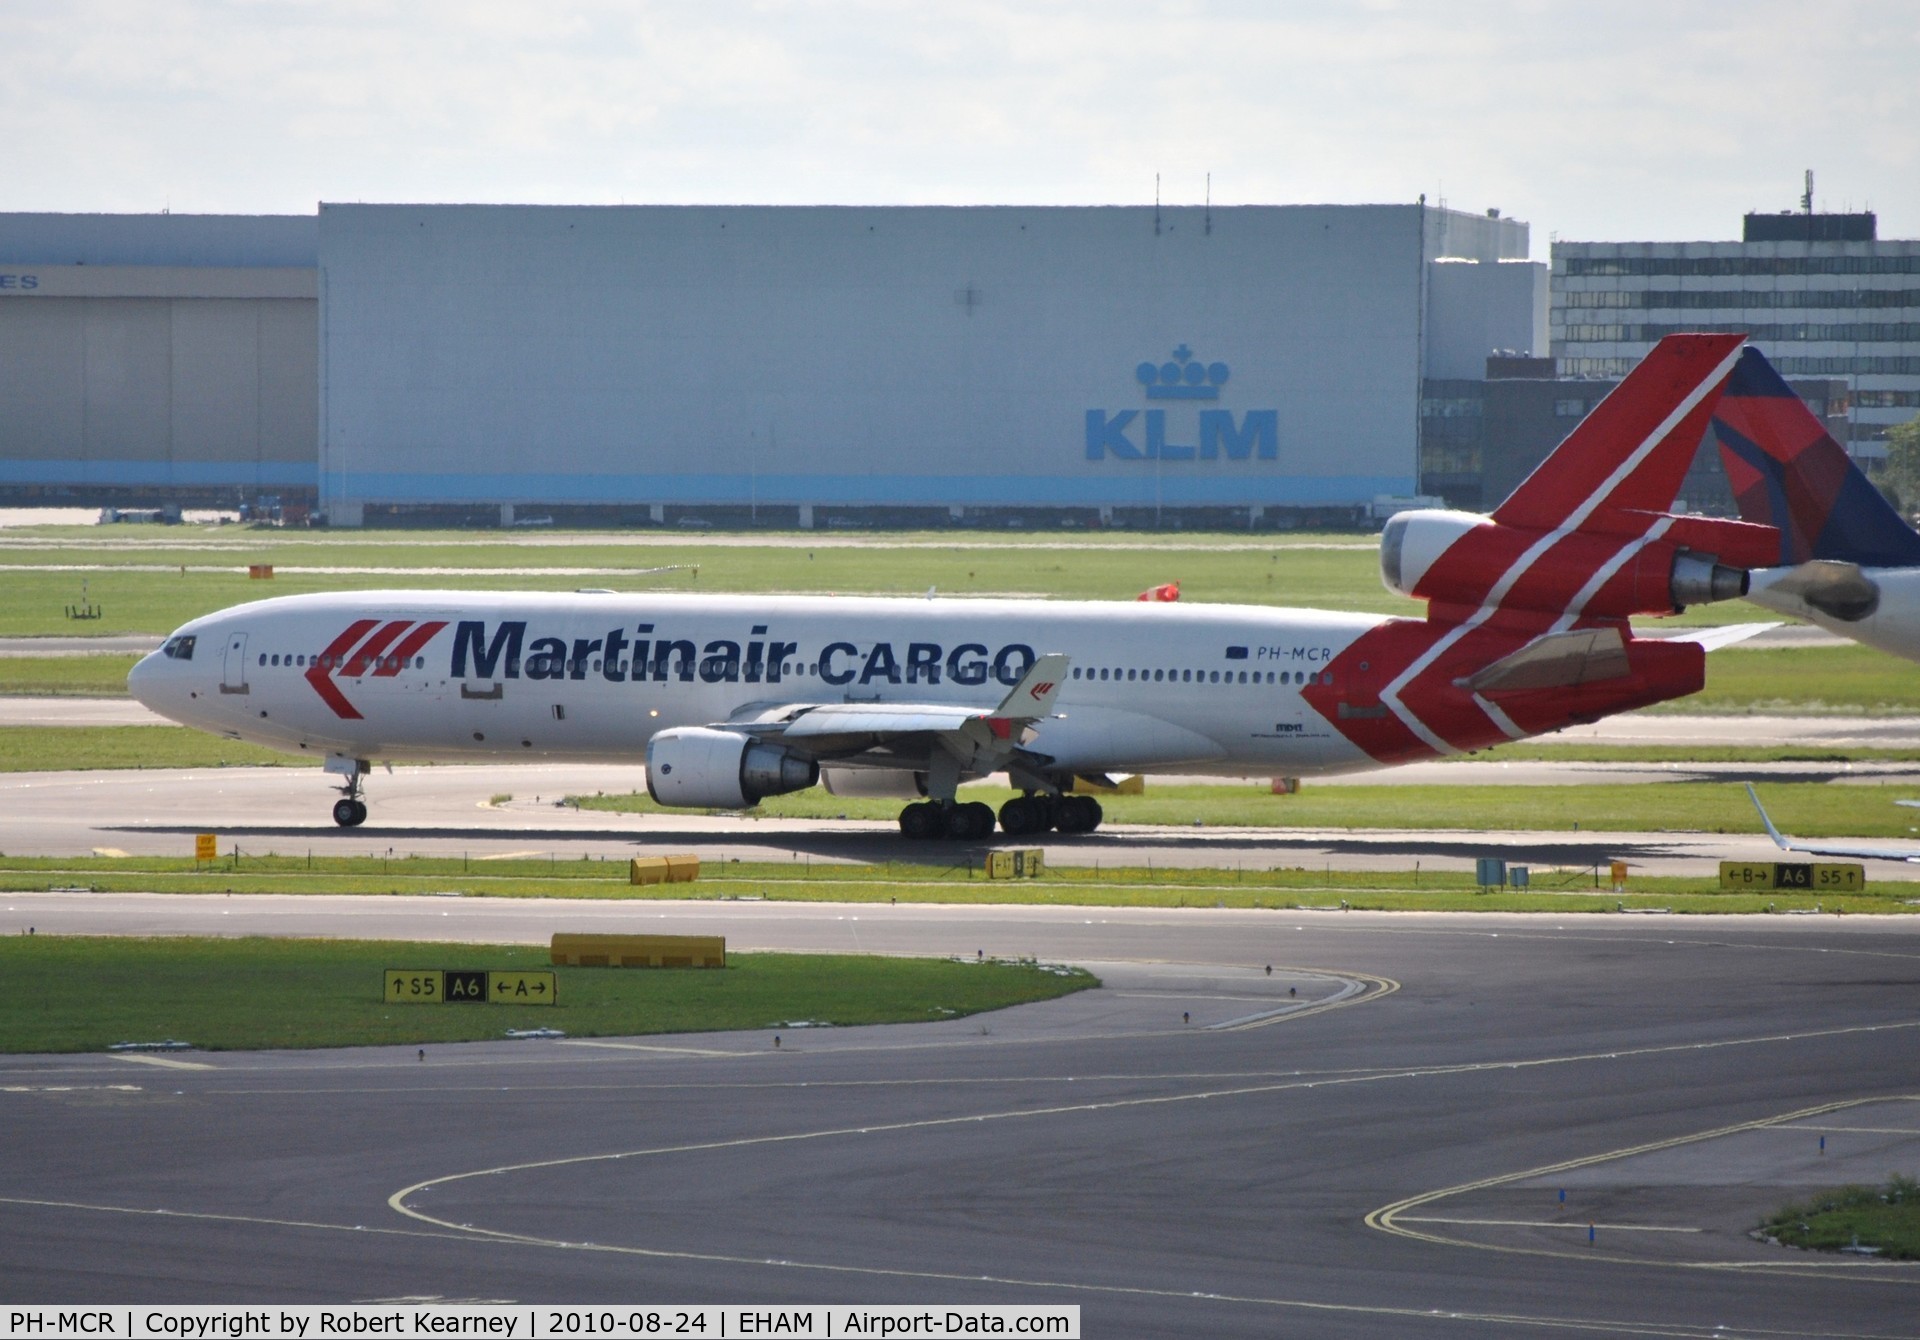 PH-MCR, 1995 McDonnell Douglas MD-11F C/N 48617, Another Martinair Cargotaxiing for take-off